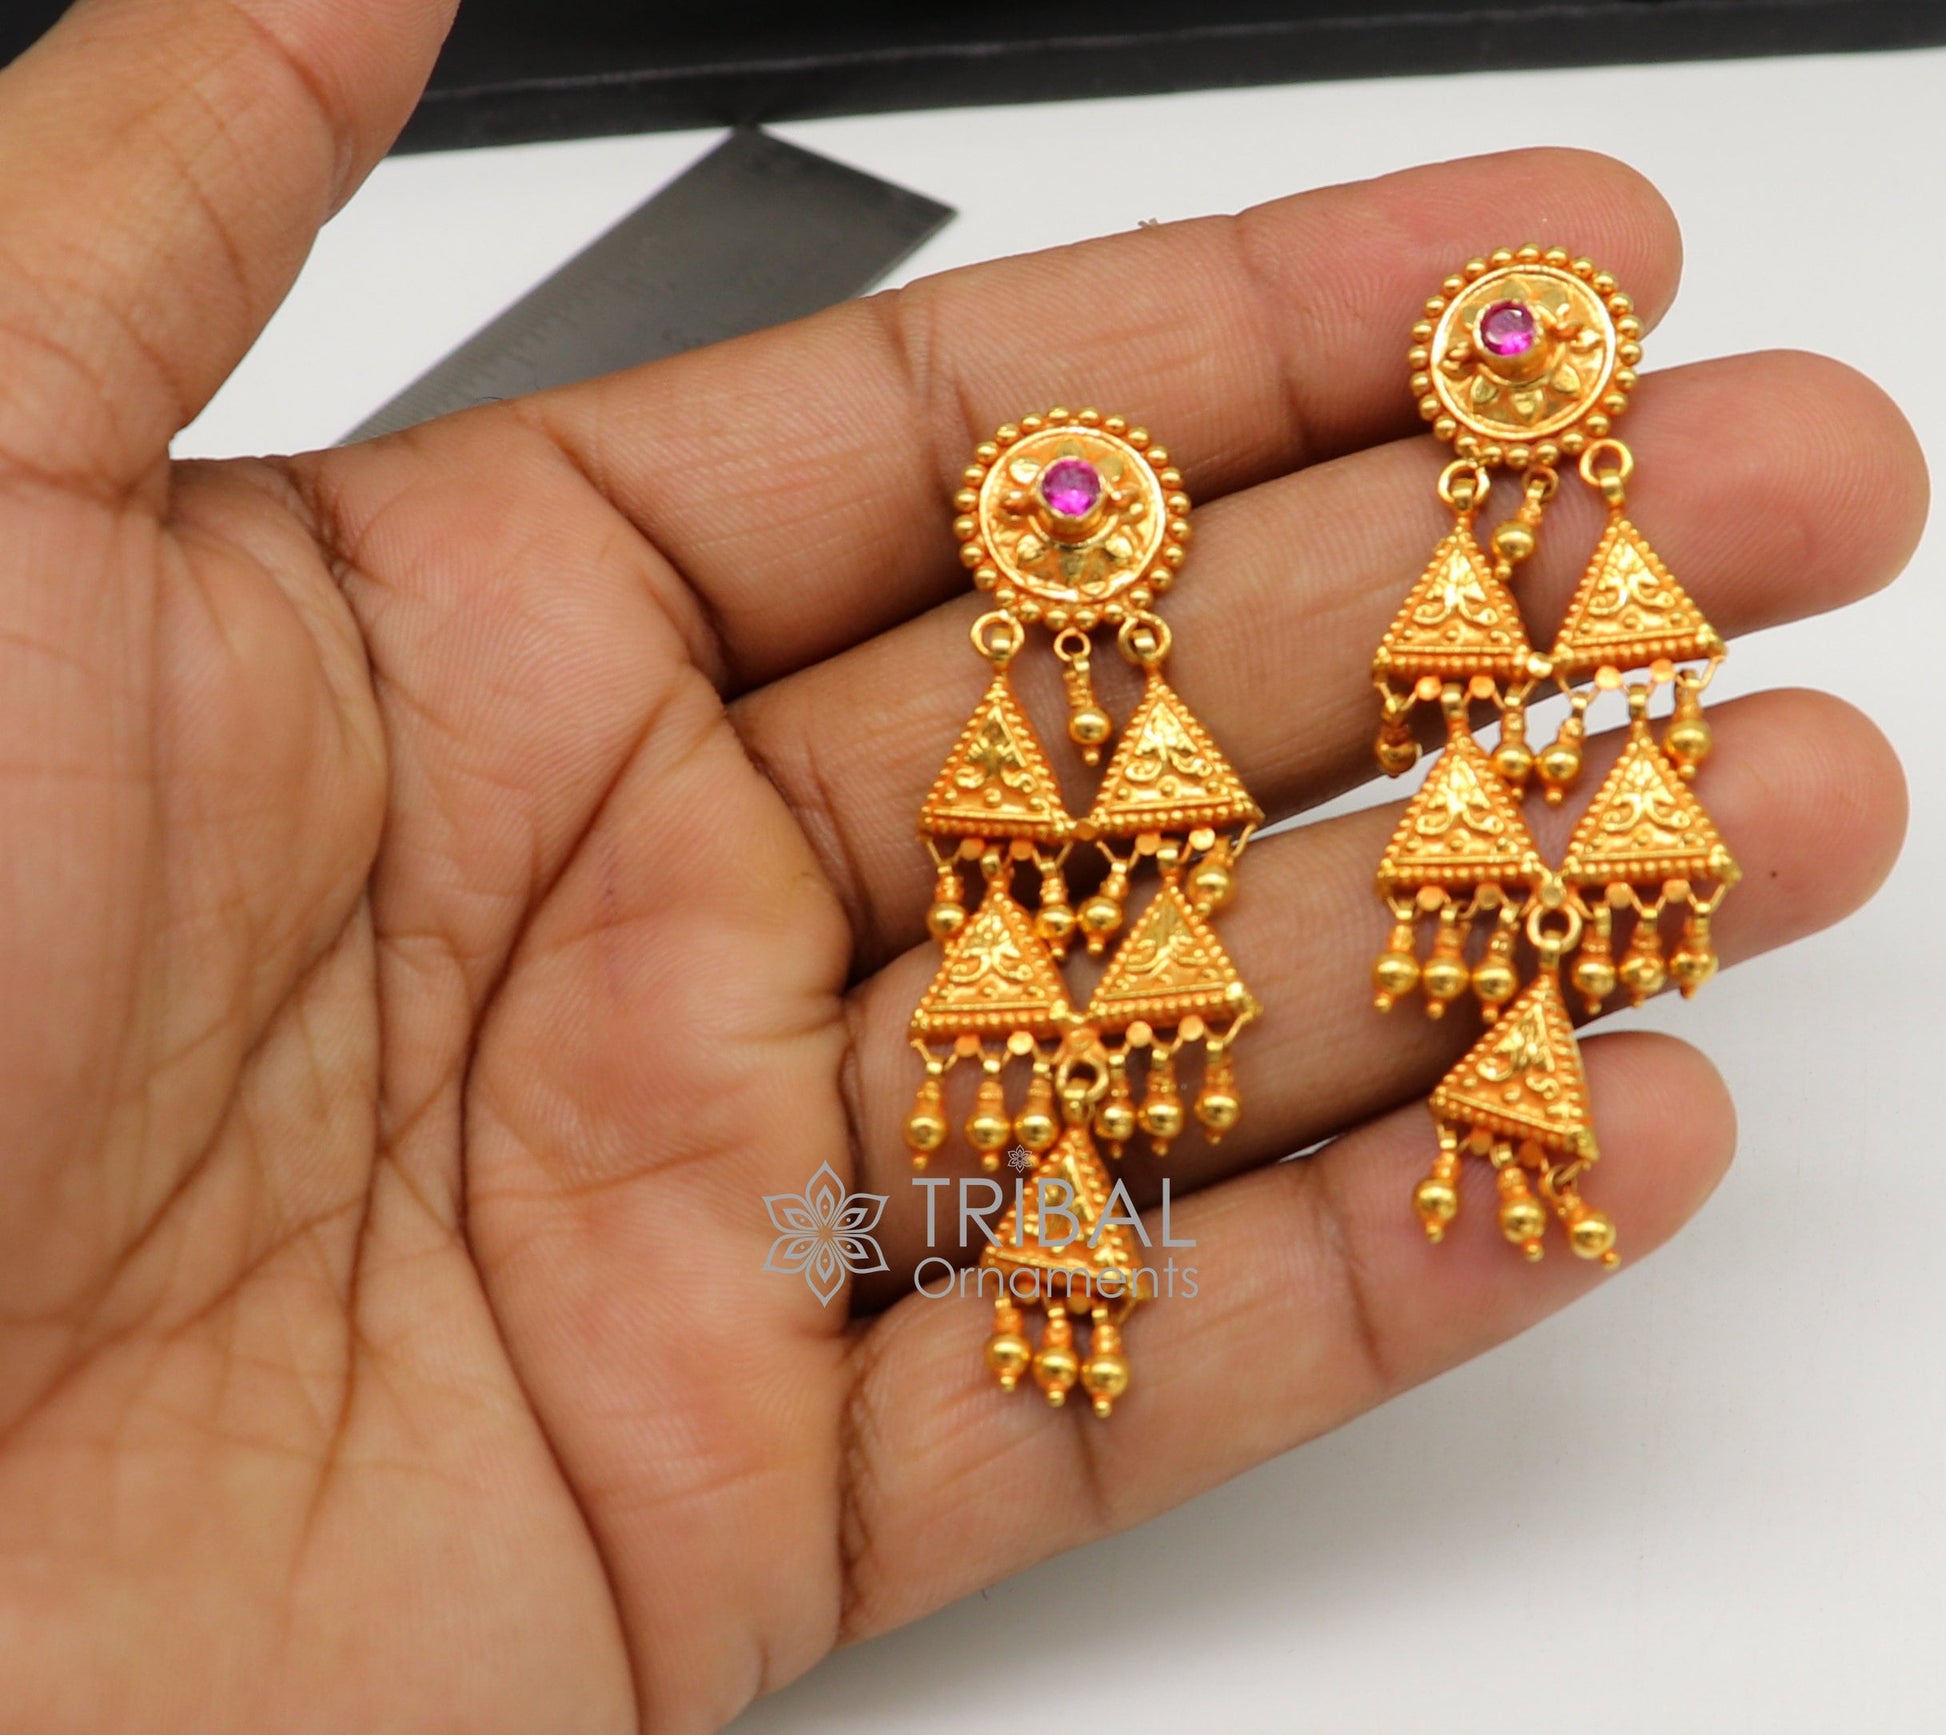 Vintage traditional cultural design fabulous 22kt yellow gold handmade ethnic tribal earrings women's tribal jewelry from India ear169 - TRIBAL ORNAMENTS